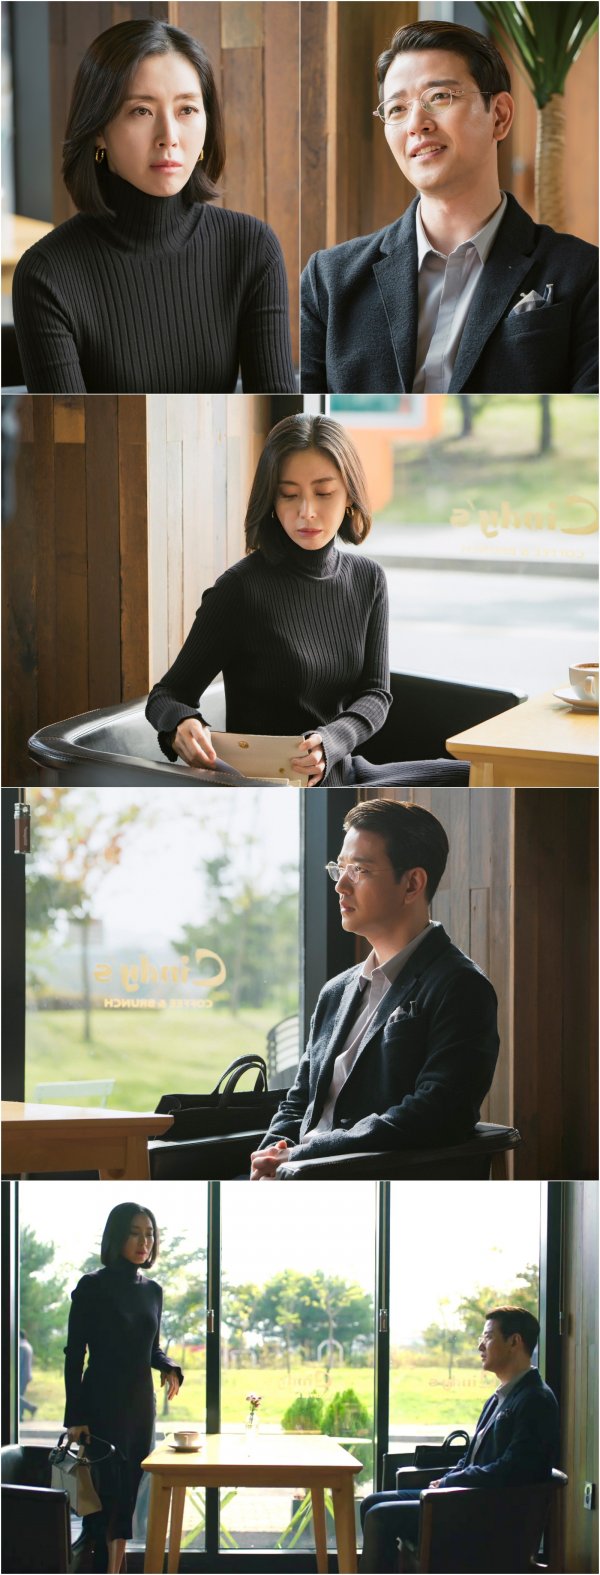 A cool meeting between Song Yoon-ah and Bae Soo-bin was captured.In the last broadcast, Ahn Jung-chul (Yoo Jun-sang) faced the secret of his wife Nam Jeong-hae, and the fire of suspicion burned.On his way back to worry about his drunk wife, Jung Jae-hoon was told that Today is the date of his mothers death and he was confused.Here, the men who cast the shadow of the crisis on these couples showed up and raised tension.In the meantime, the crew is in a photo of the concubine, and a subtle tension flows between Jung Jae-hoon.Unlike the cool-eyed Namjeonghae, Jung Jae-hoons face is filled with a sad smile.The details of the story are not revealed, but there is a secret between the two 15 years ago. The atmosphere of the two people with different temperatures stimulates curiosity.In the ensuing photo, Nam Jeong-hae is drawing attention as he is holding out an envelope of questions, drawing attention to the two peoples move to have a sharp, sharp-edged Feeling that has been cut down by the years.In the 9th broadcast on the 7th, while Ahn Jung-cheol and Nam Jung-hae are raising suspicion and distrust, Jung Jae-hoon and Baek Hae-sooks unhealed wounds deepen.The Elegant Friends production team said, The characters will be at a critical turning point starting from the ninth inning today (7th).The past of Jung Jae-hoon will be revealed, he said. It is a starting point for the relationship and a moment that changed Jung Jae-hoon.Yoo Jun-sang didnt know either! Two peoples hidden past attention